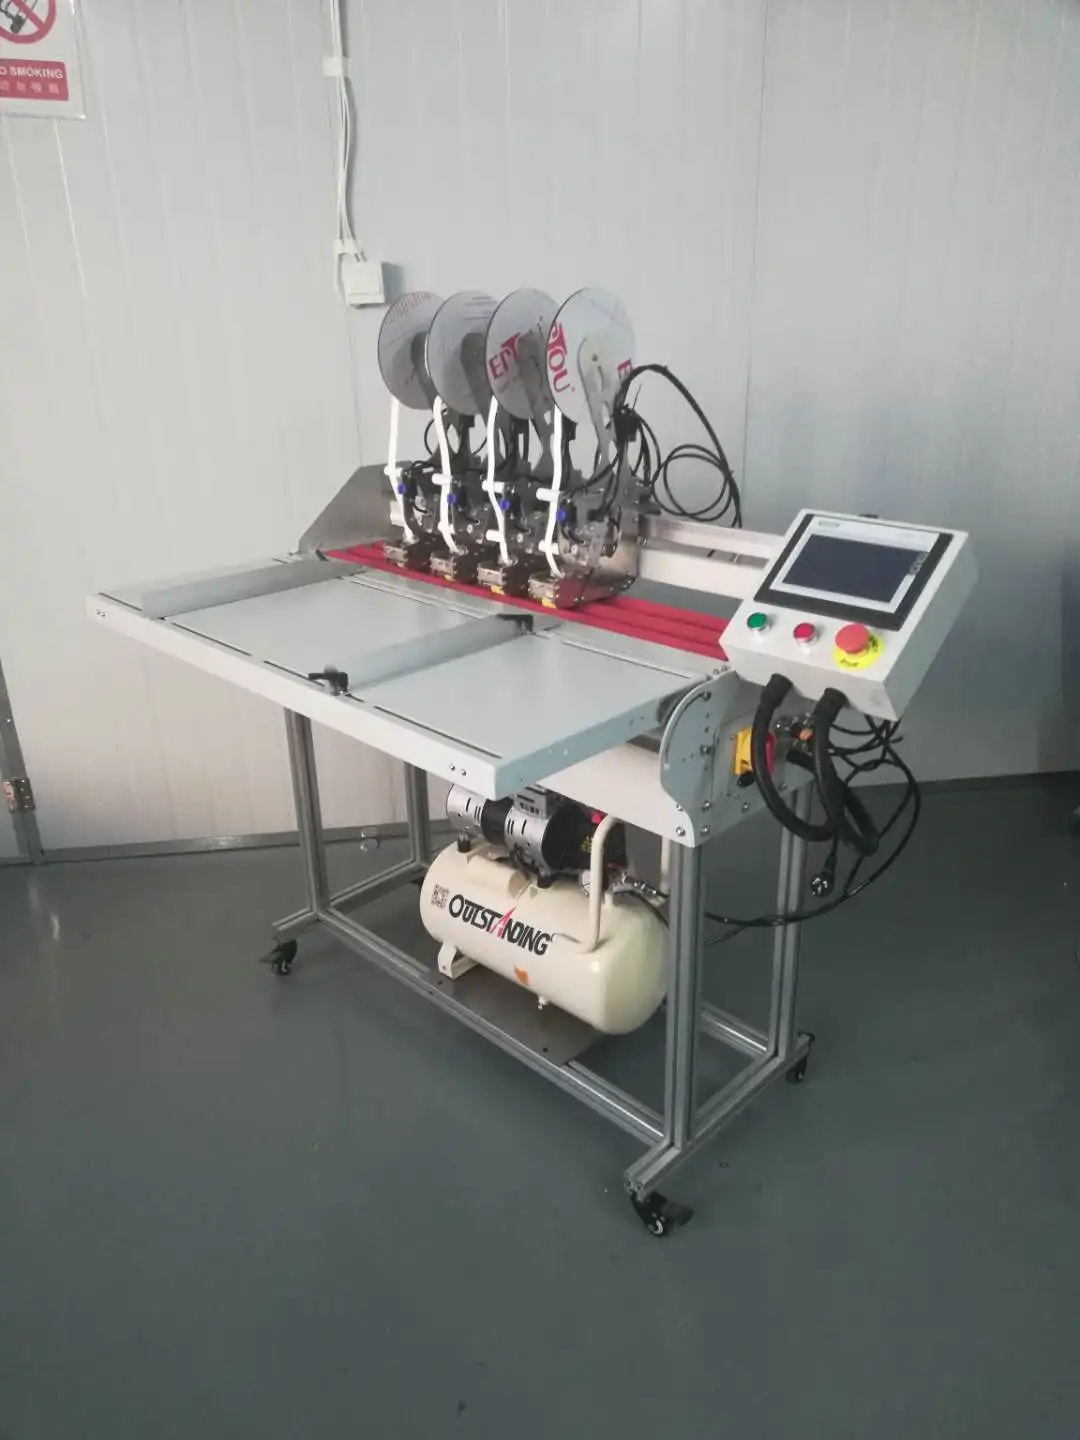 Tape Dispensing Machine With Air Compressor Double Side Tape Application Machine Tear Double Sided Tape Machine Buy Double Sided Tape Dispenser Tape Dispensing Machine With Air Compressor Tear Tape Machine Product On